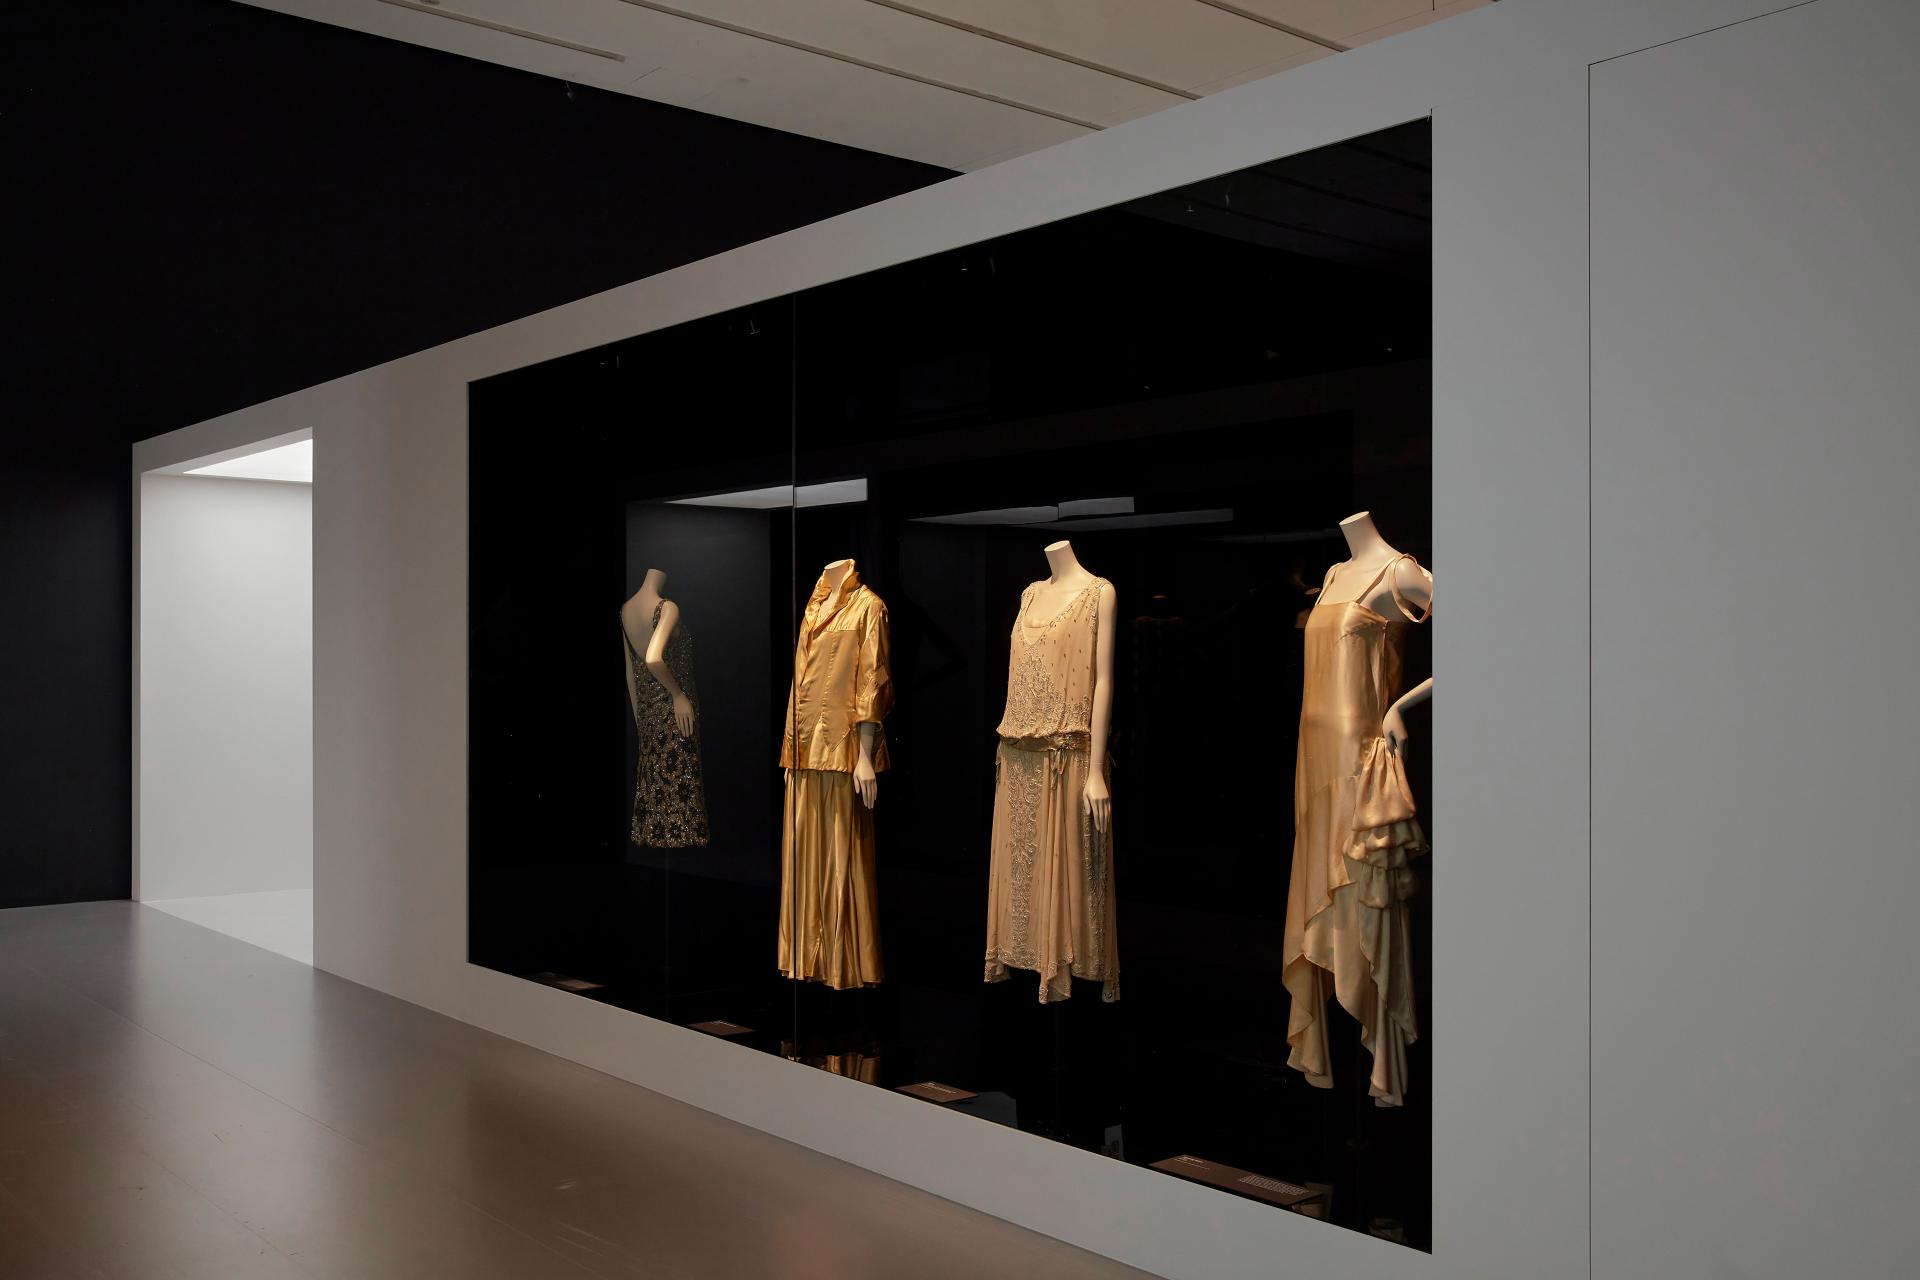 The life and work of Gabrielle Chanel has arrived at the NGV in classic  twentieth century style